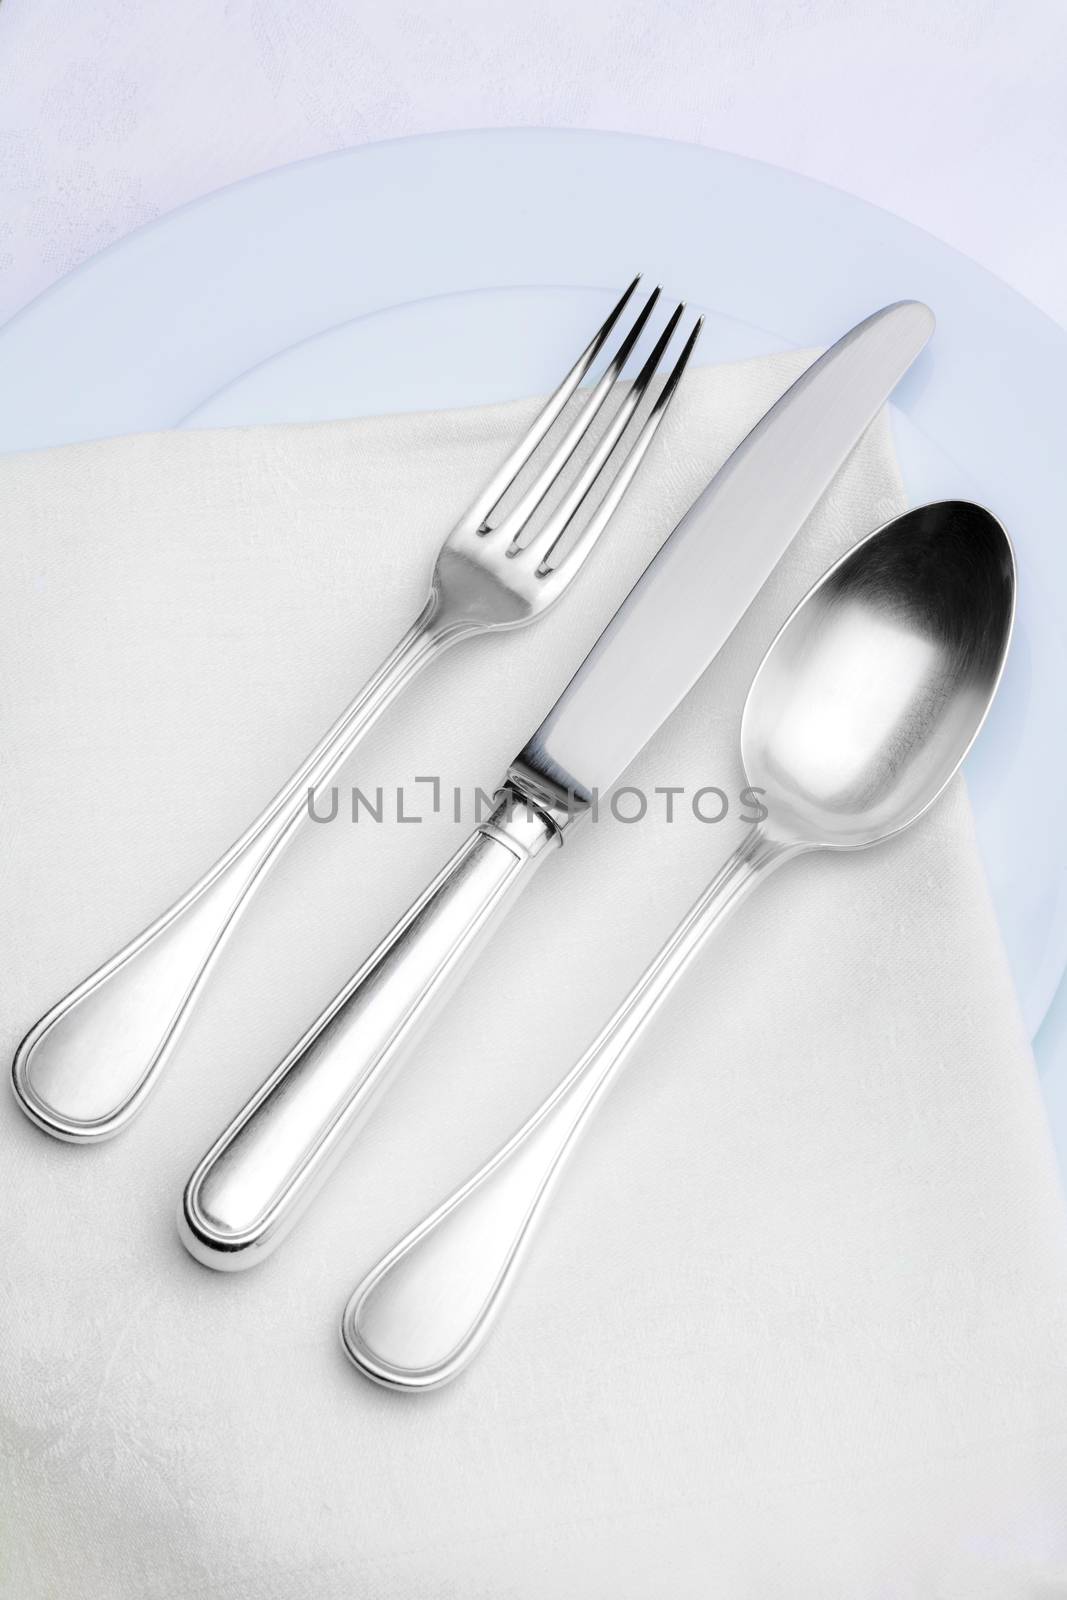 elegant silverware setting on plate with white cloth